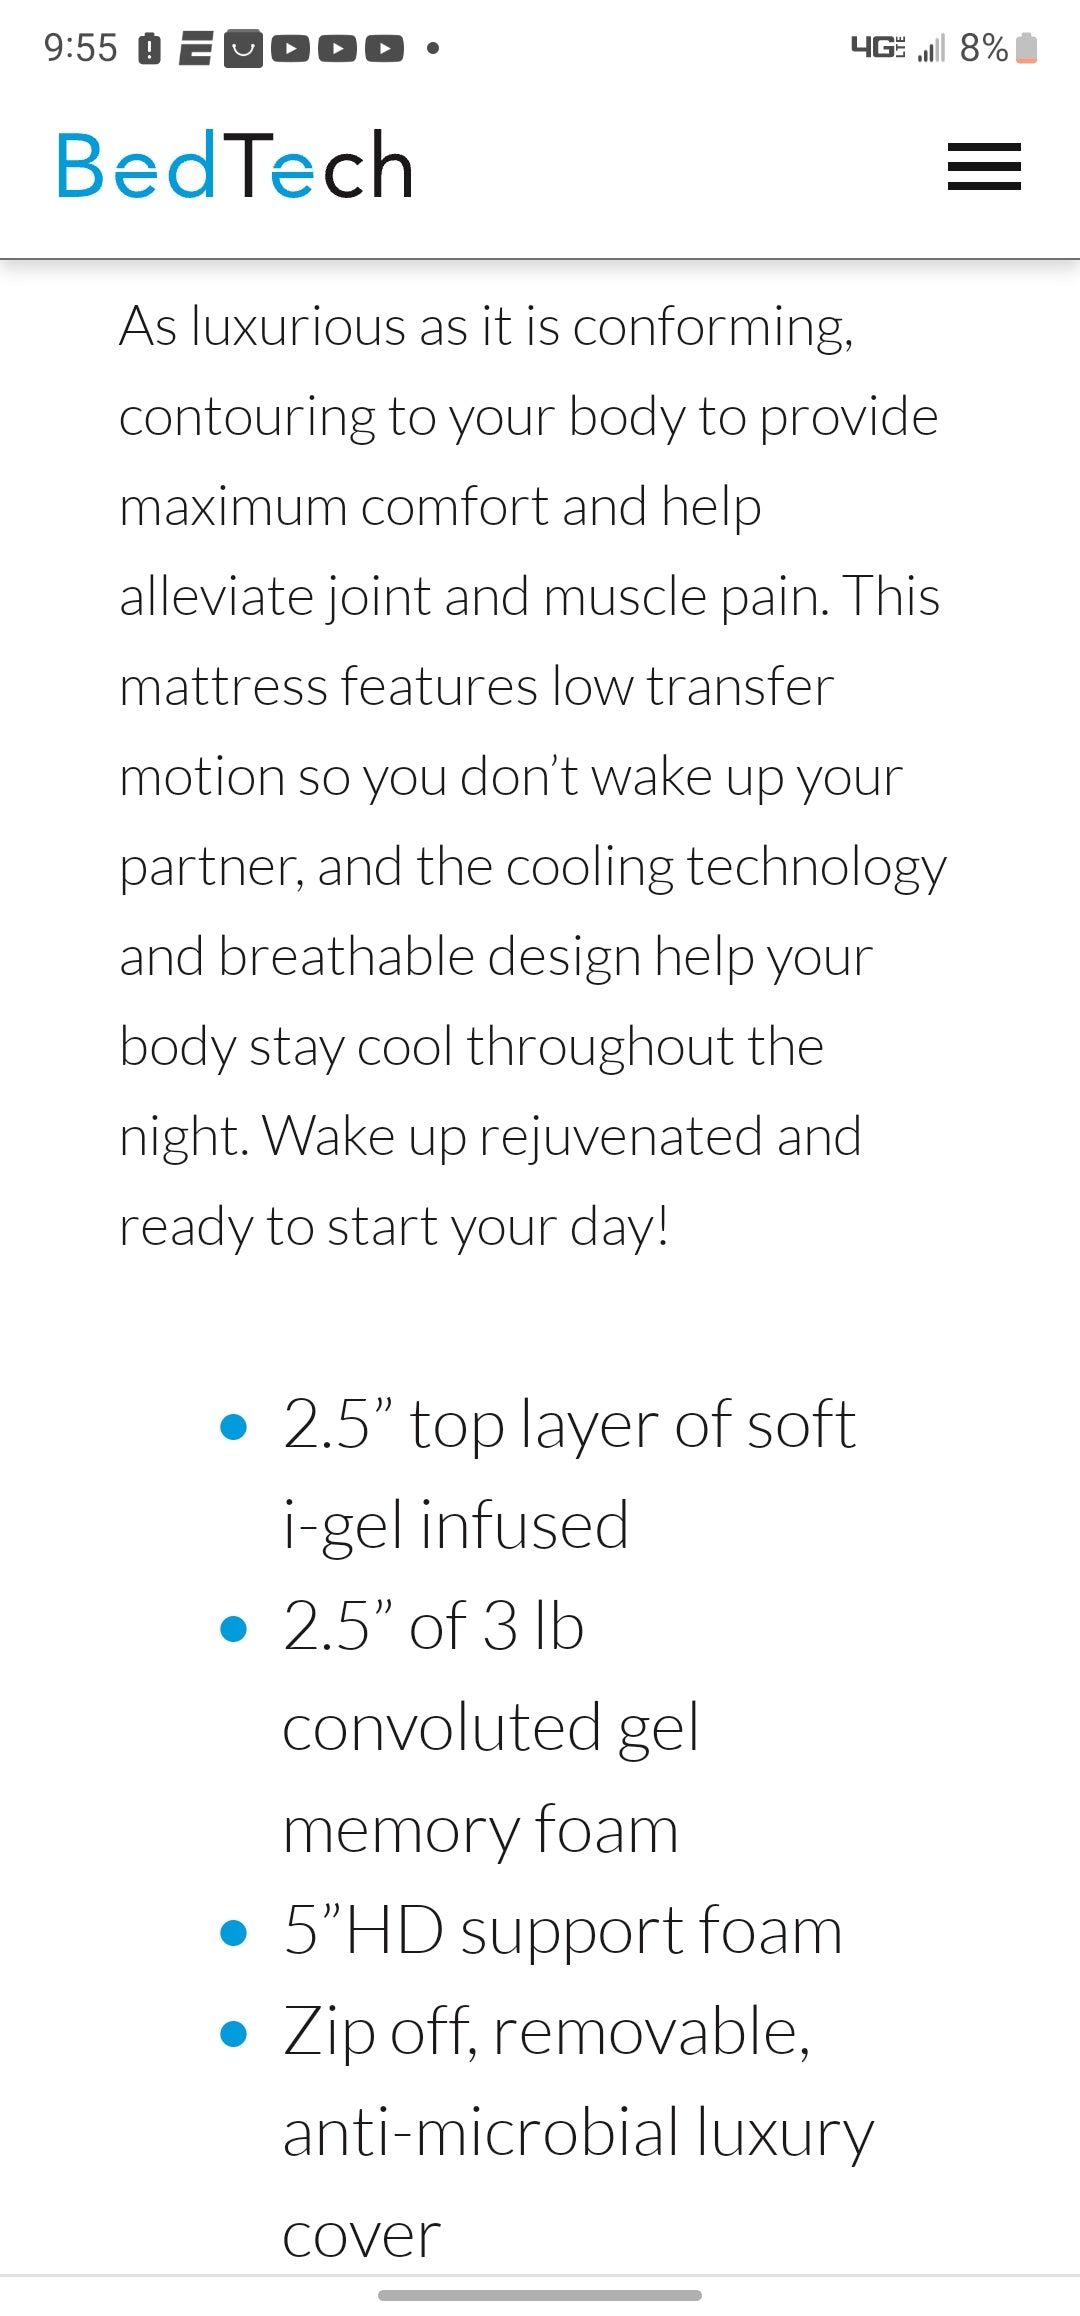 10" Gel Comfort (Bed Tech) Mattress ★Back-to-school SPECIAL★ SAME DAY LOCAL DELIVERY